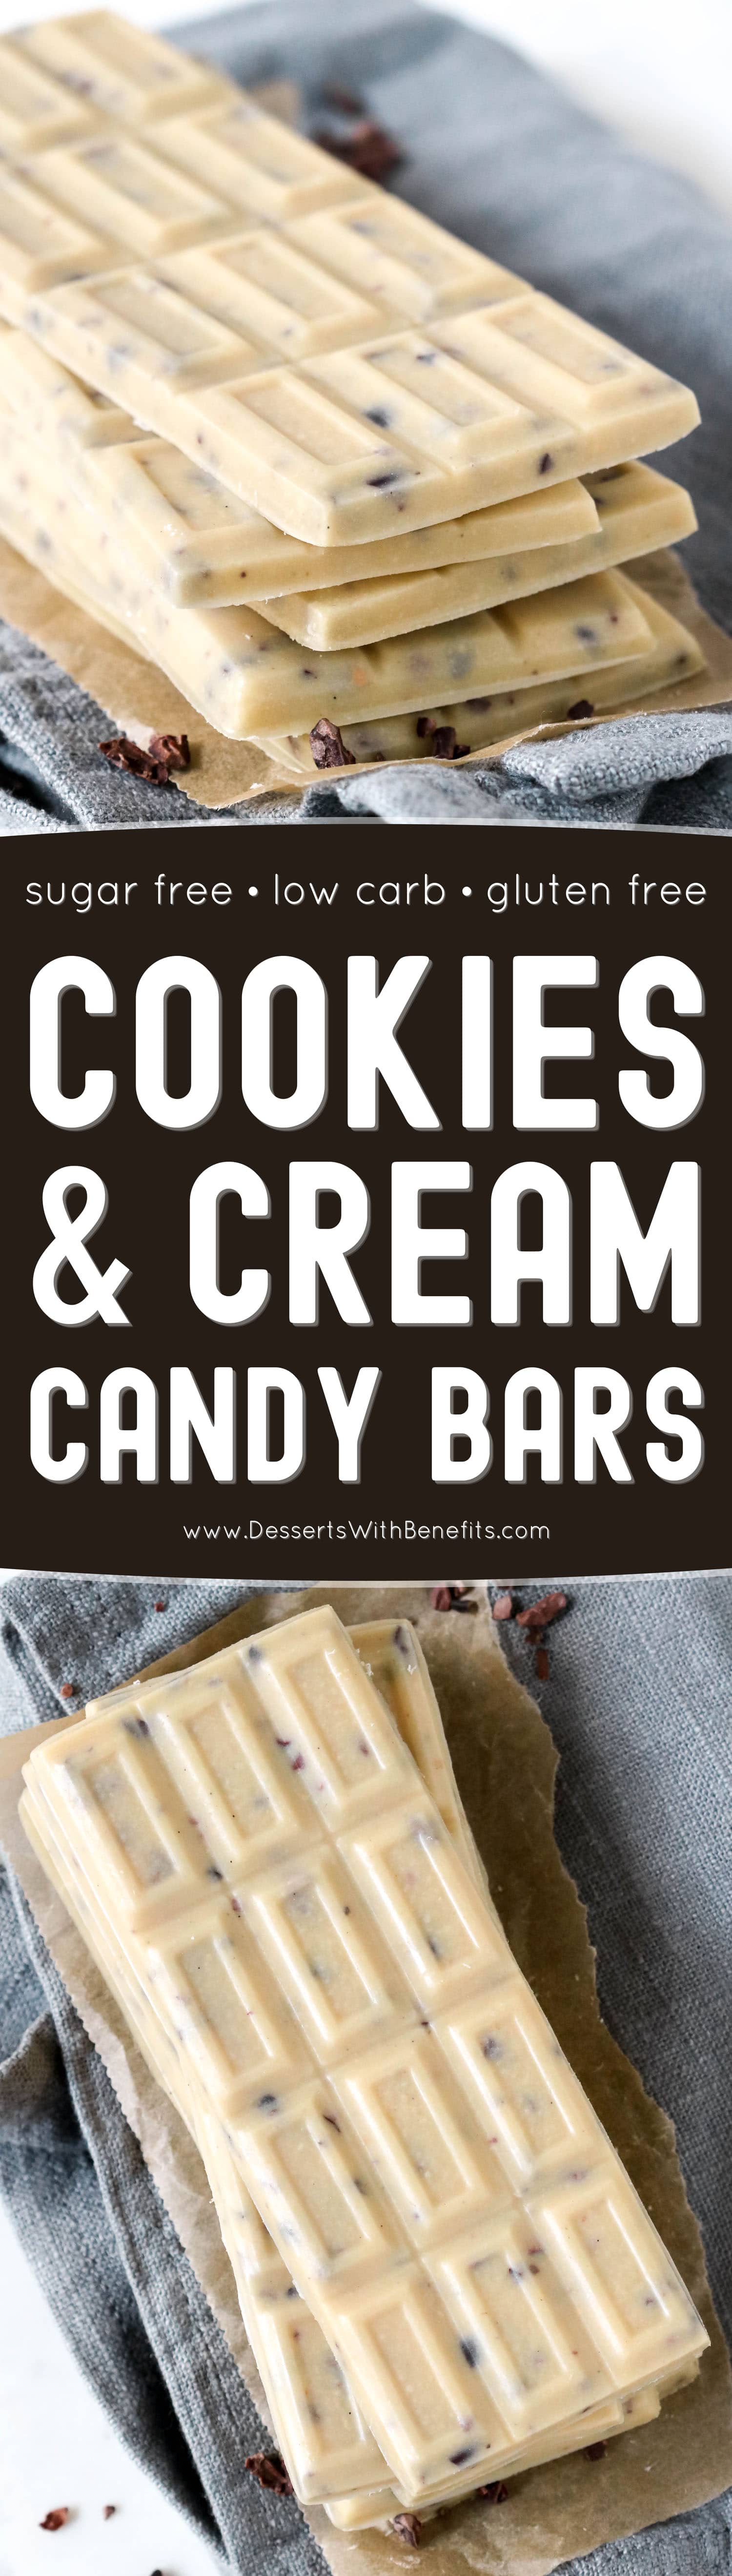 Just like the store-bought version, these from-scratch Cookies and Cream Candy Bars start with a smooth, creamy, and sweet white chocolate base, which is studded with crunchy chocolatey bits throughout. One bite and you'd never know these are sugar free, low carb, keto, and gluten free too!